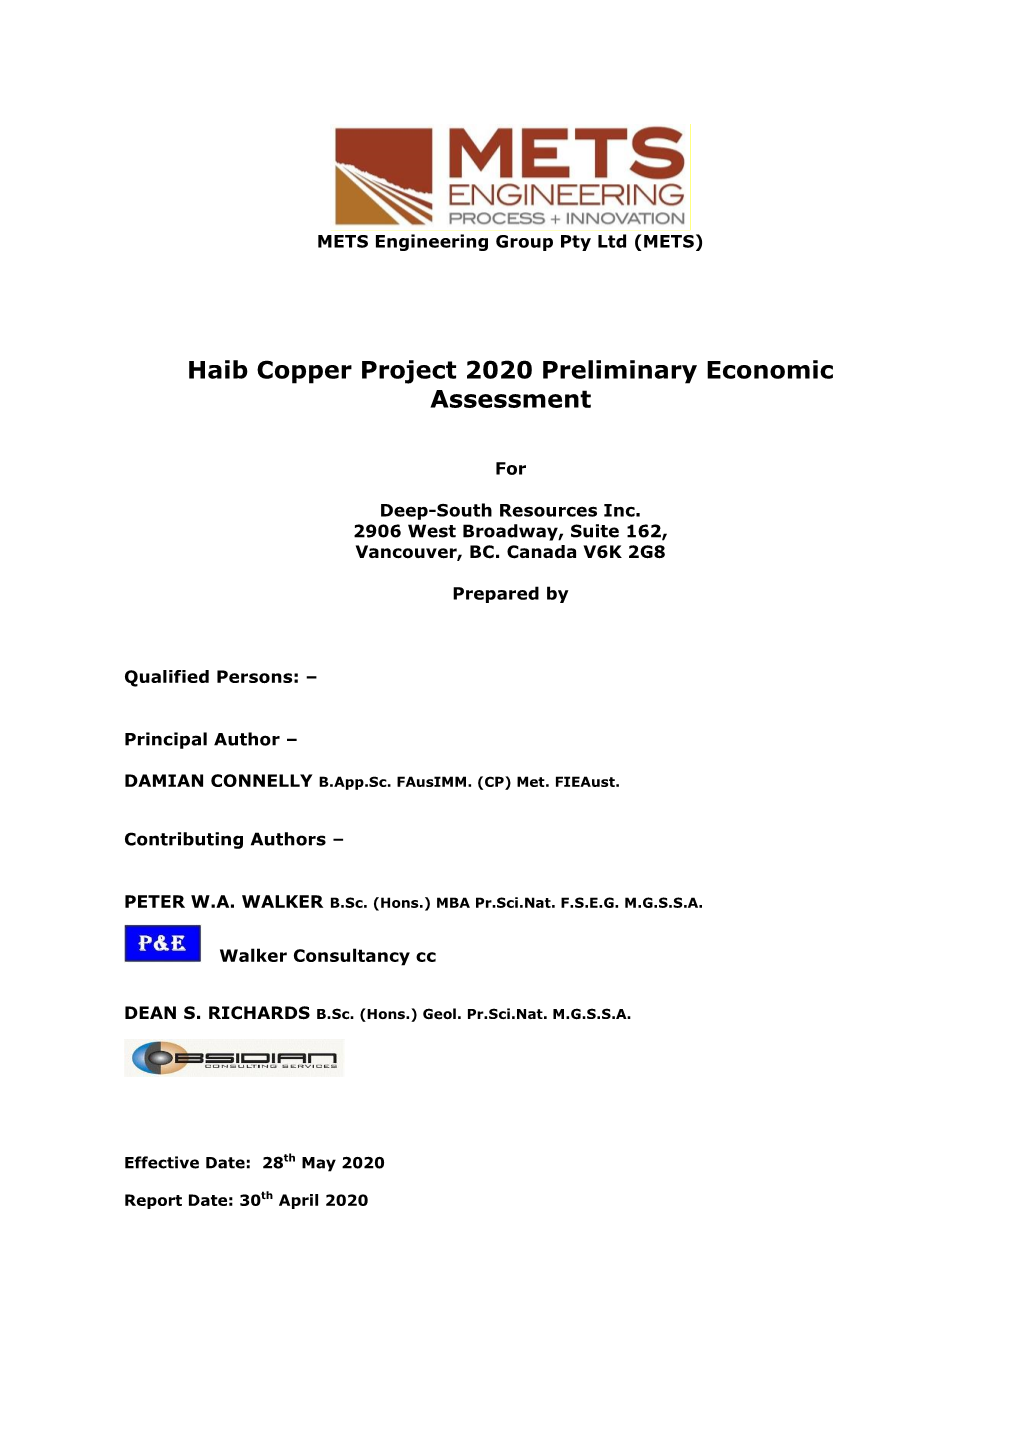 Haib Copper Project 2020 Updated Preliminary Economic Assessment